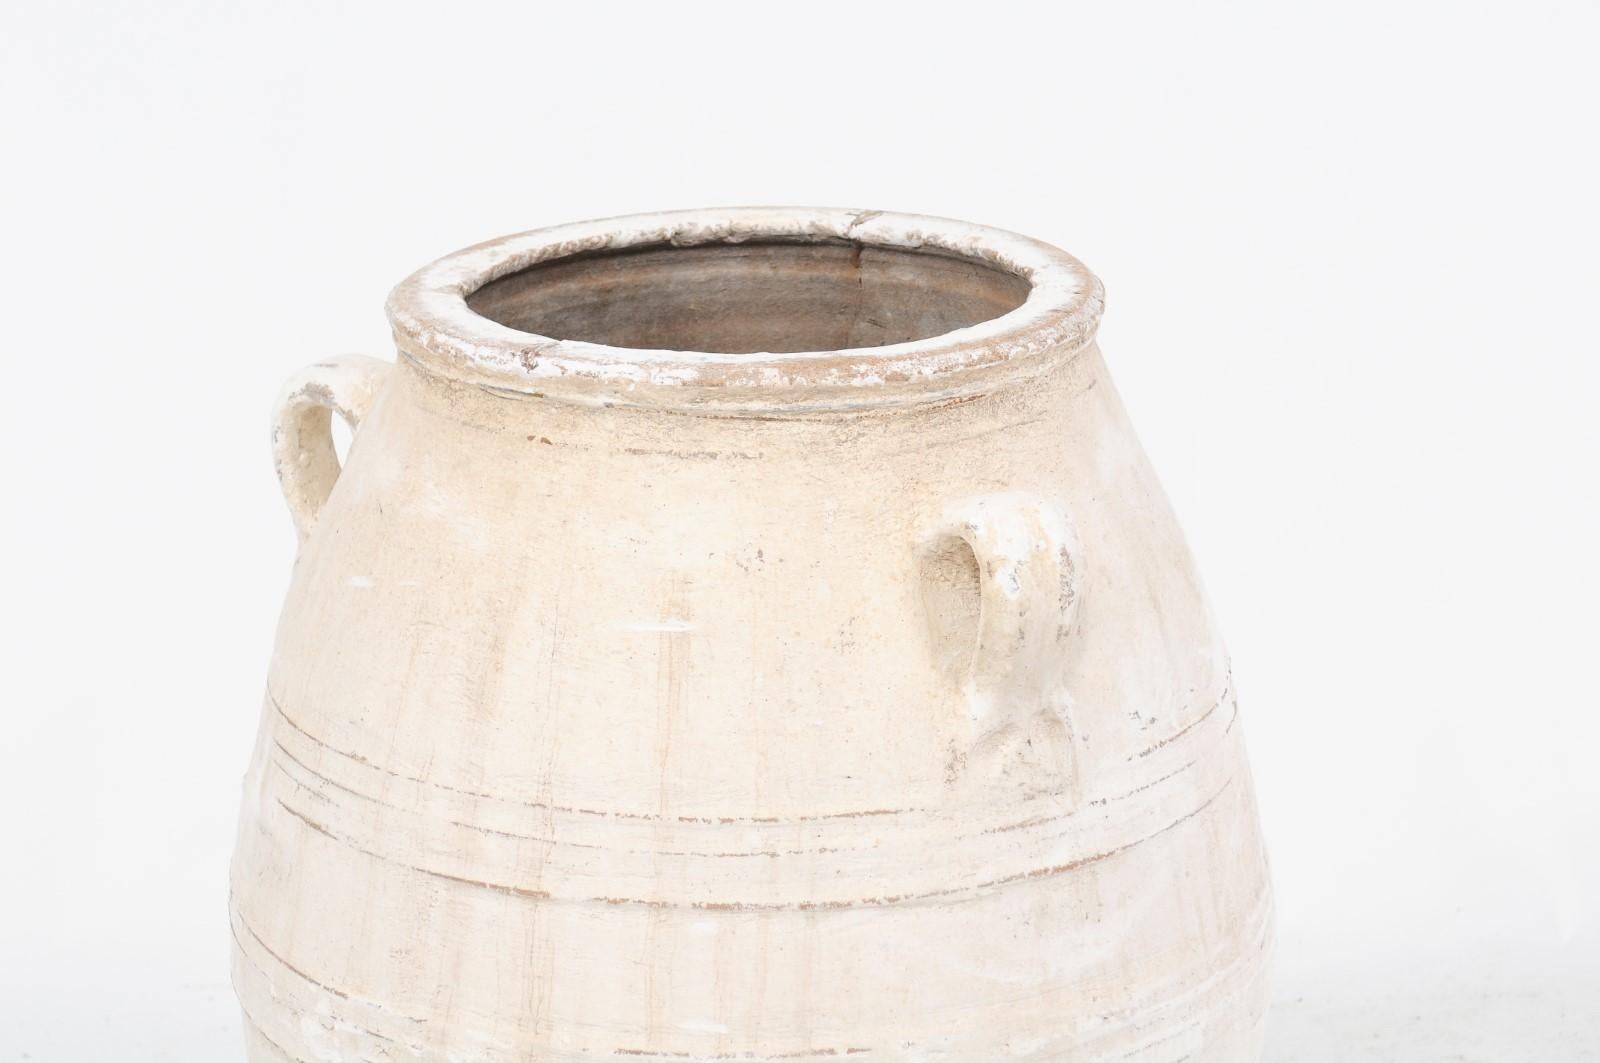 A large vintage three-handled painted terracotta pot from mid-20th century Greece, with white finish and rounded belly. Picture this large 1960s pot in its former life, on a shaded terrace under an olive tree overlooking the Mediterranean Sea in